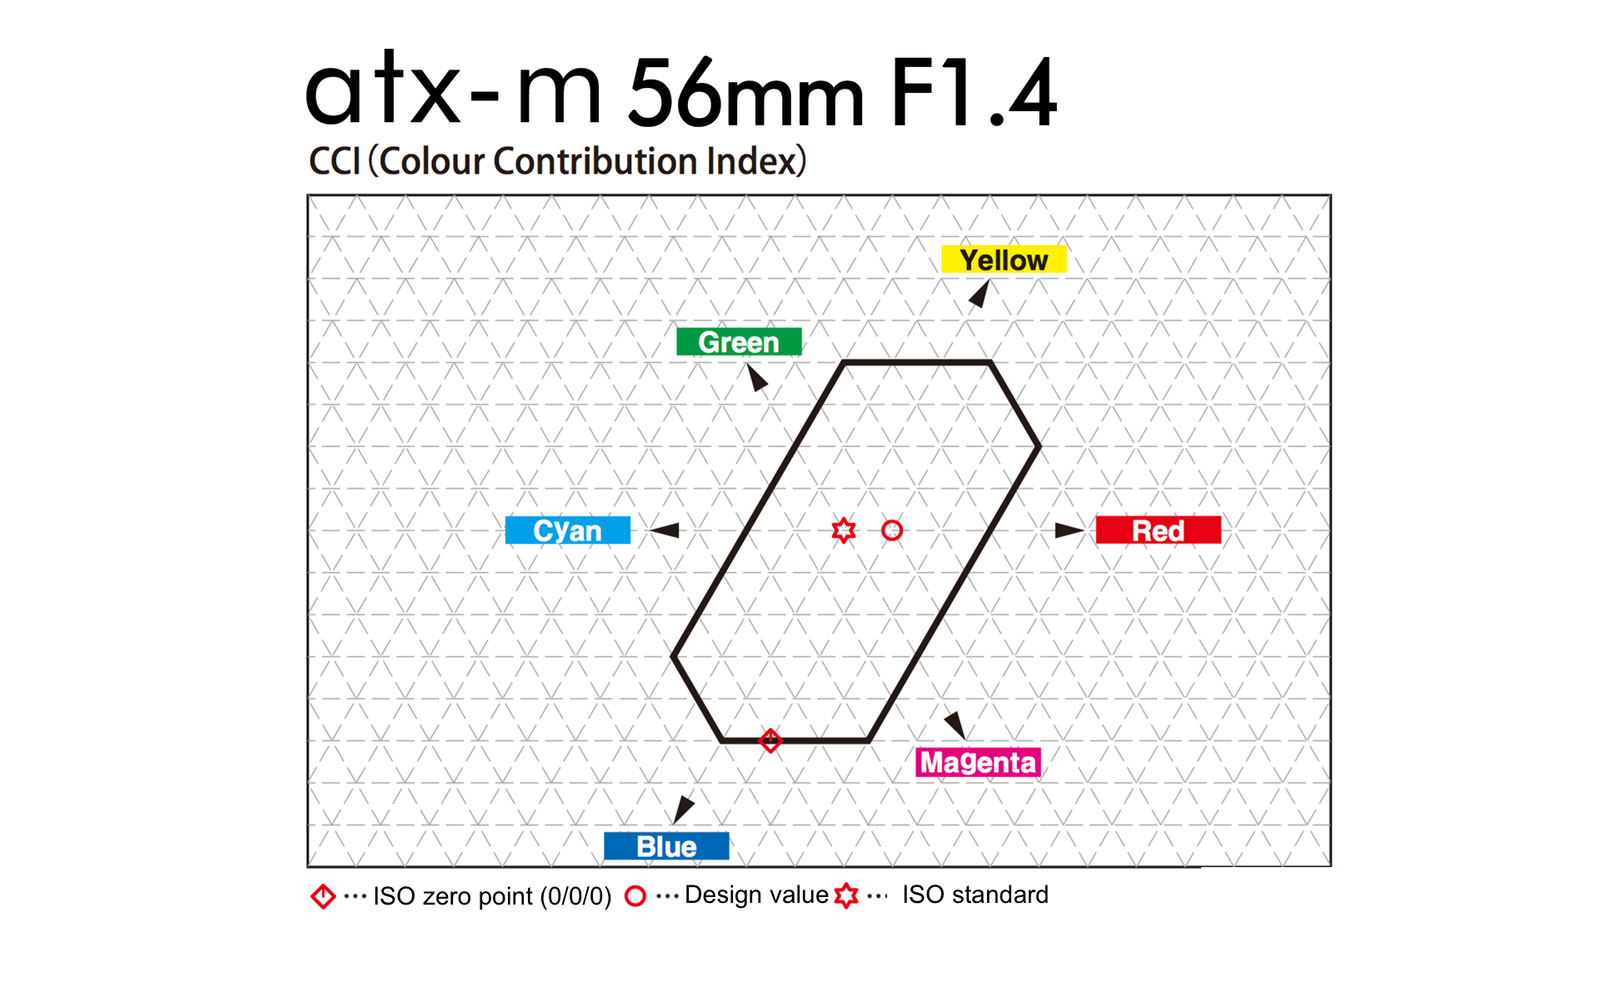 CCI means Color Contribution Index, that measures the light transmission values of the lens. Particularly, it is a three number system which describes the degree to which a lens is expected to change the overall color of a photograph relative to that obtained with no lens in the system. Compared to the location of the ISO standard point, actual value point tends to be closer to warm tones (Yellow, Red), but stays within the ideal coordinates that proves natural and well balanced color reproduction ability of the lens.